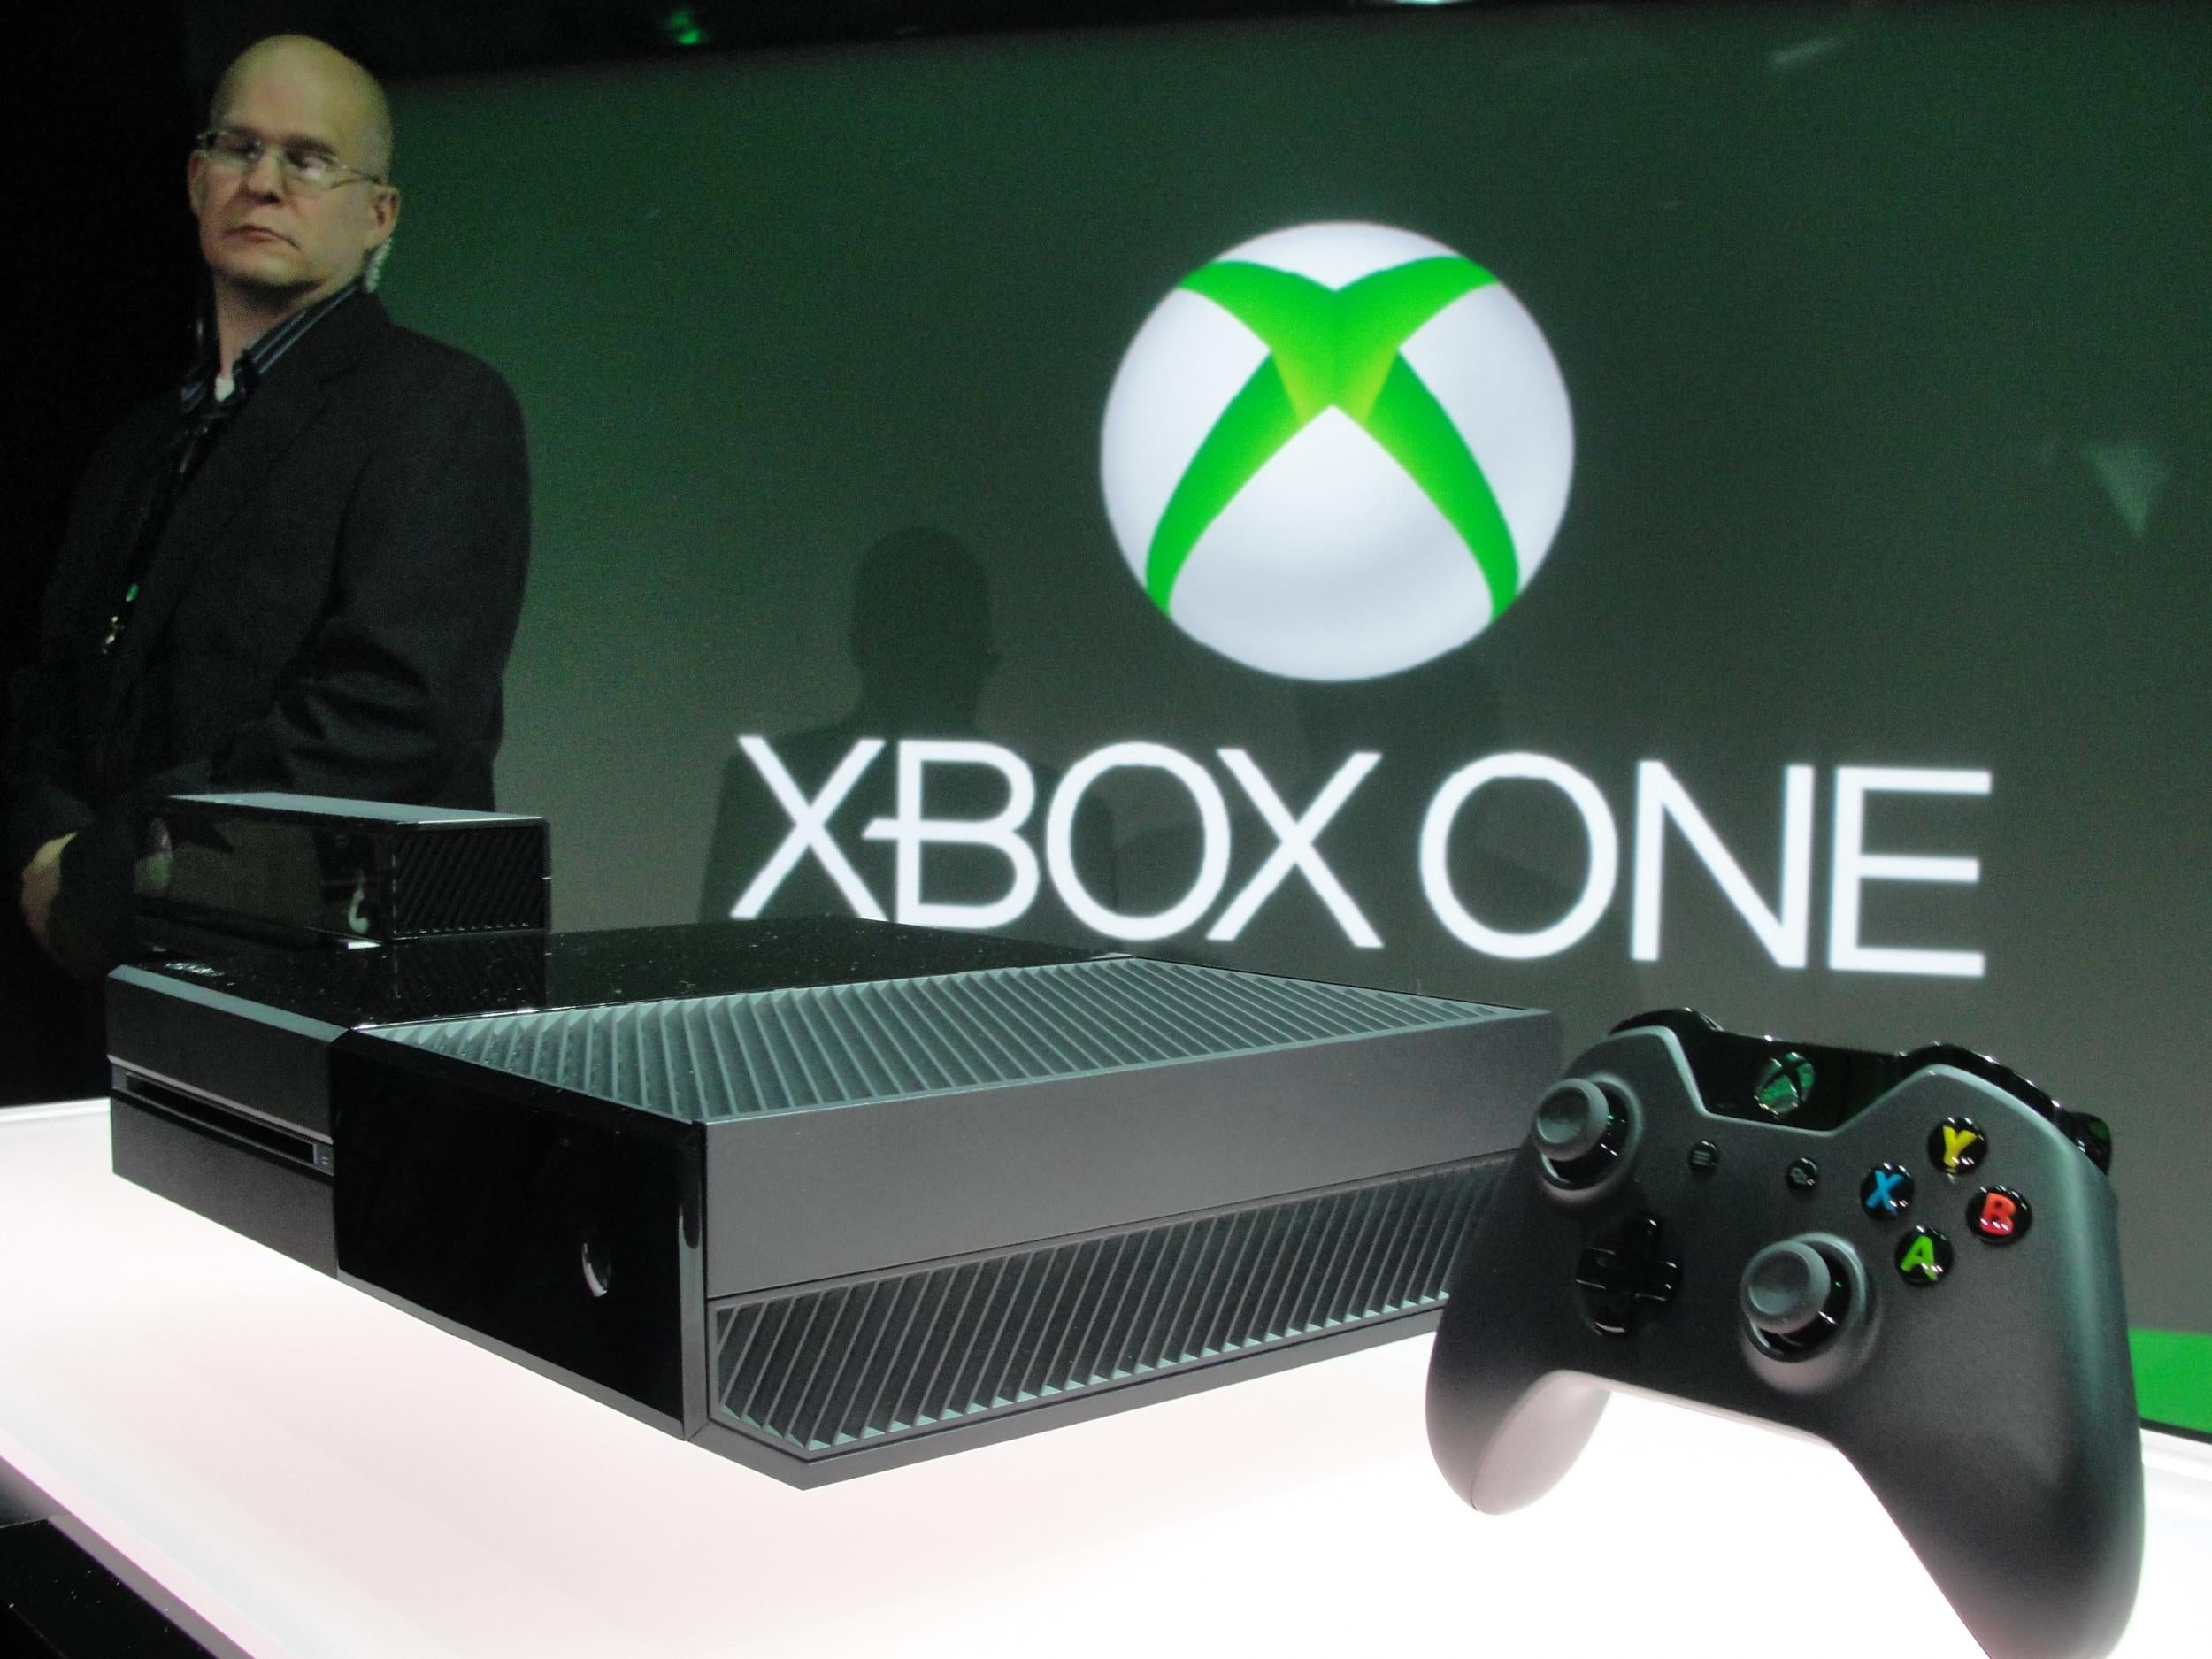 The Xbox One at its launch event in 2013